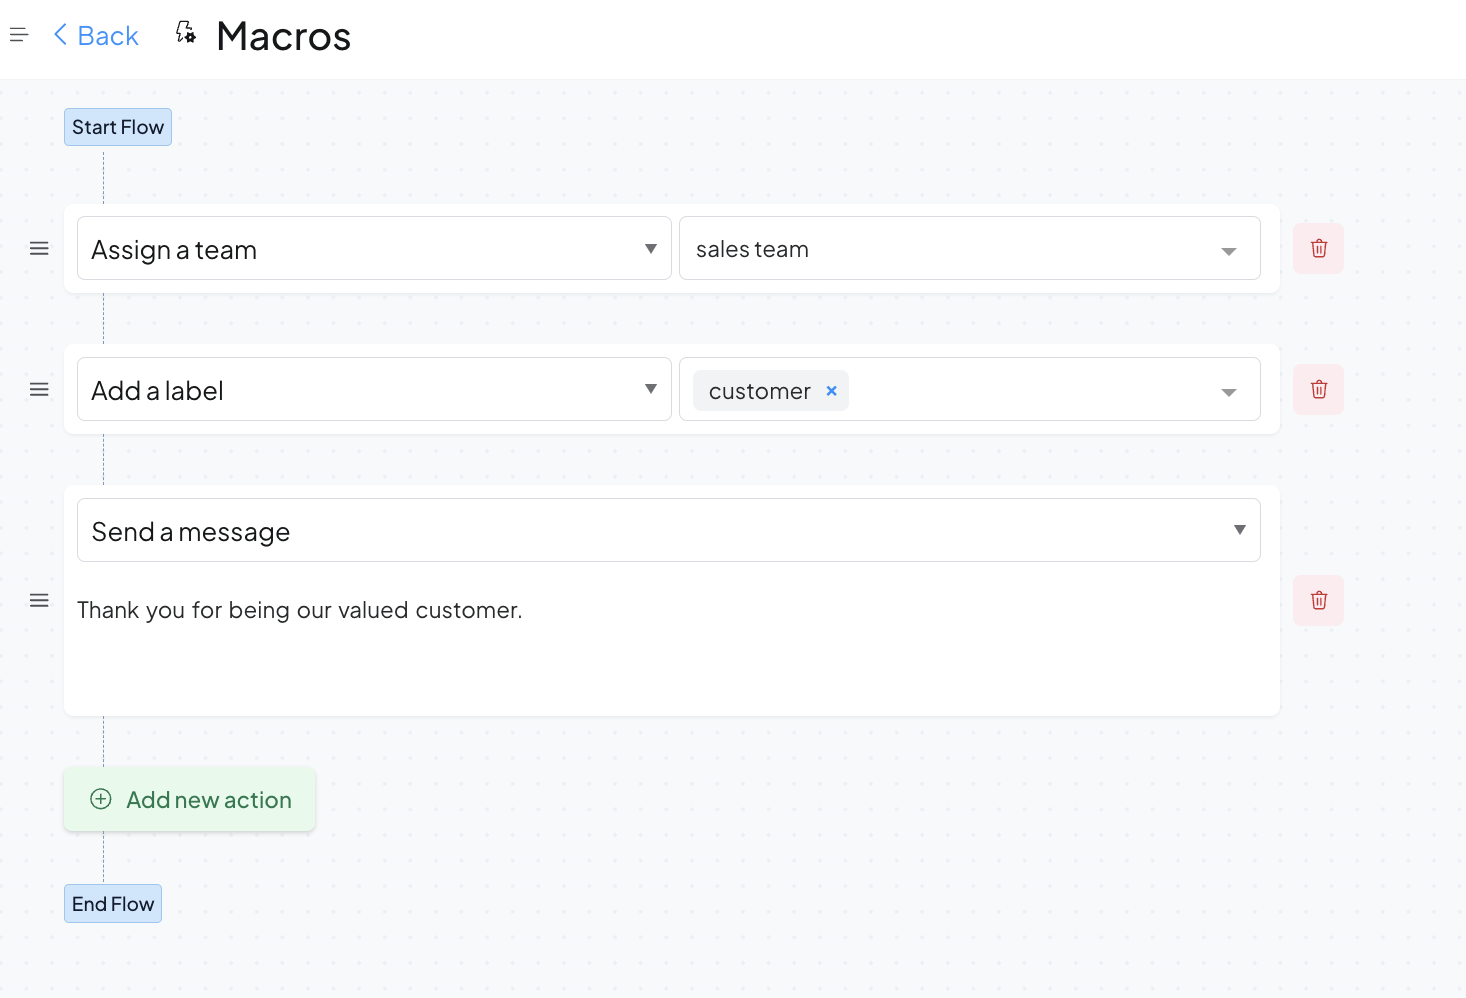 Macros are shortcuts for customer service agents, bundling tasks like tagging, emailing, and updating in one click. It  boosts efficiency by helping agents repeat actions easily and aid in onboarding new team members with pre-set steps.